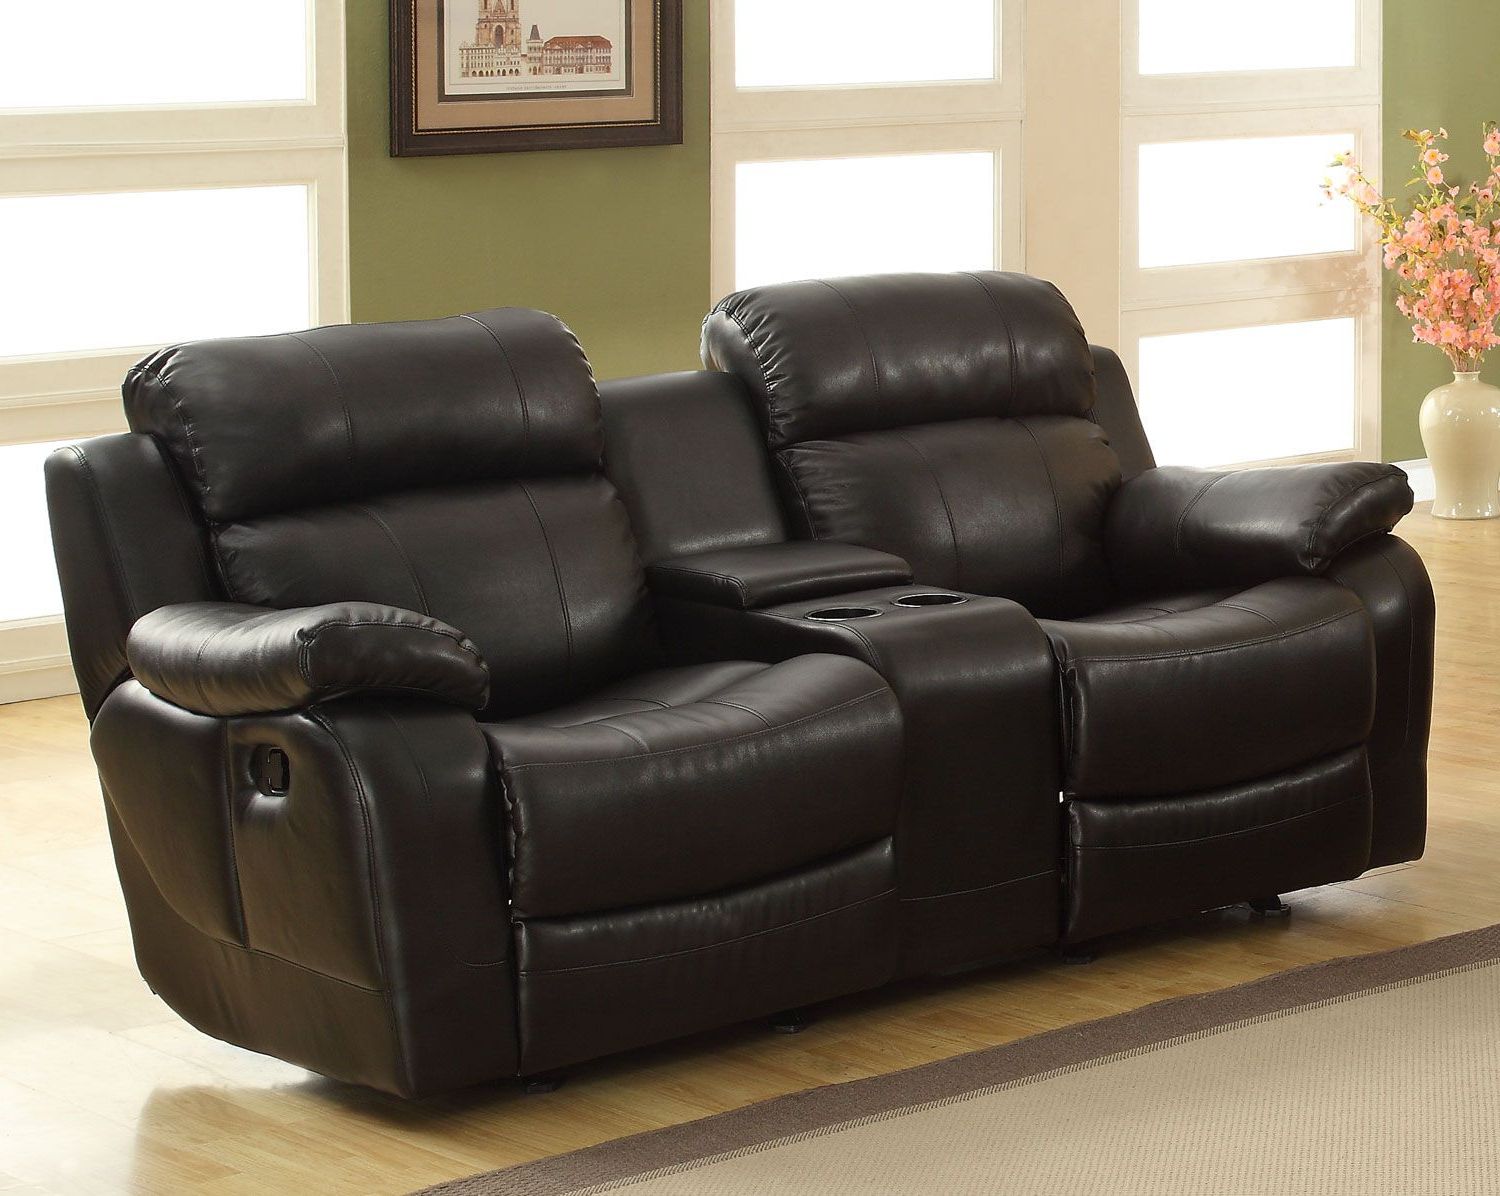 Double Glider Loveseats Within Preferred Homelegance Marille Love Seat Glider Recliner With Center (View 7 of 30)